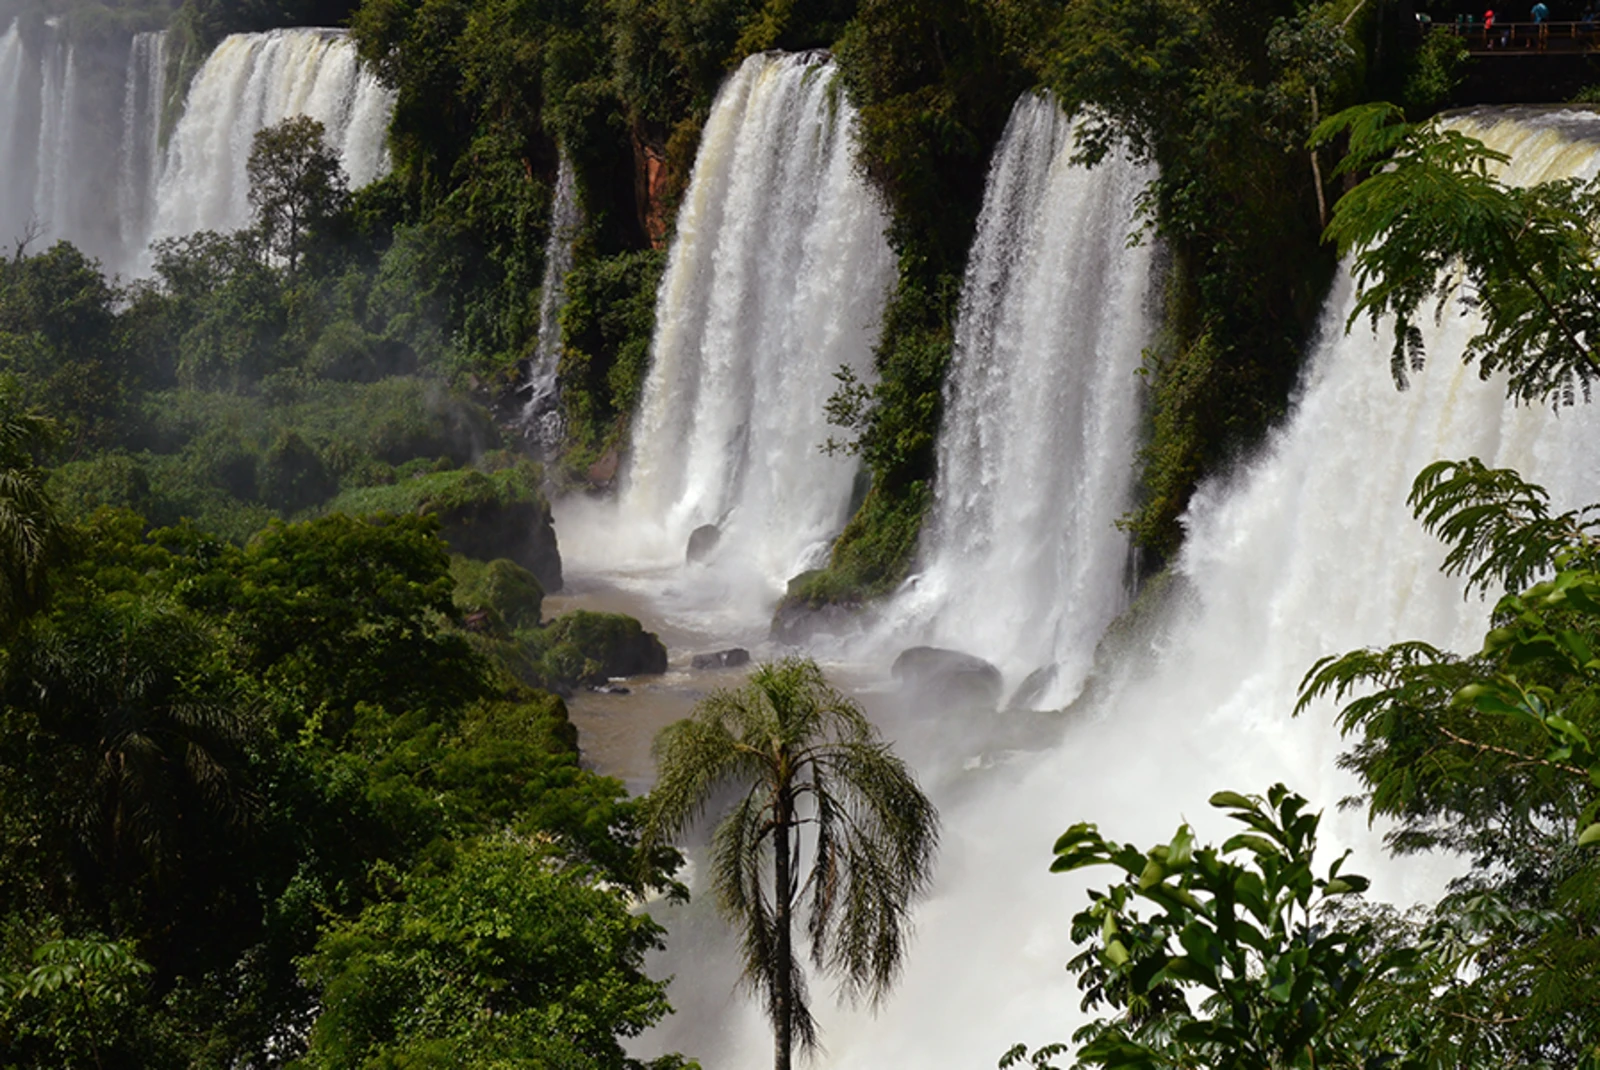 An Adventurer’s 8-Day Guide to Argentina - Day 4: Experience Iguazu Falls